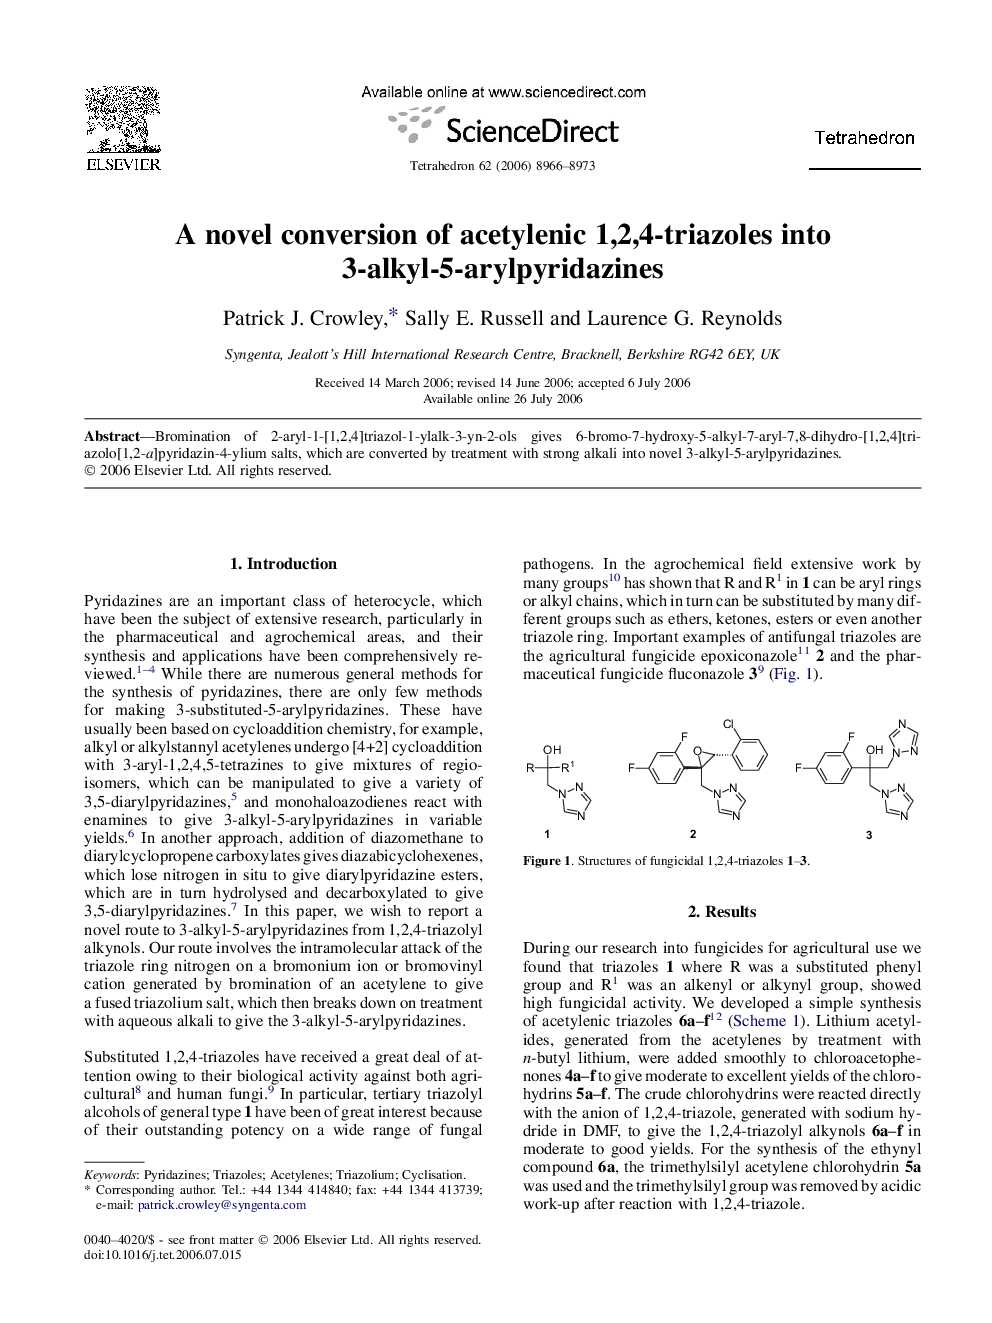 A novel conversion of acetylenic 1,2,4-triazoles into 3-alkyl-5-arylpyridazines